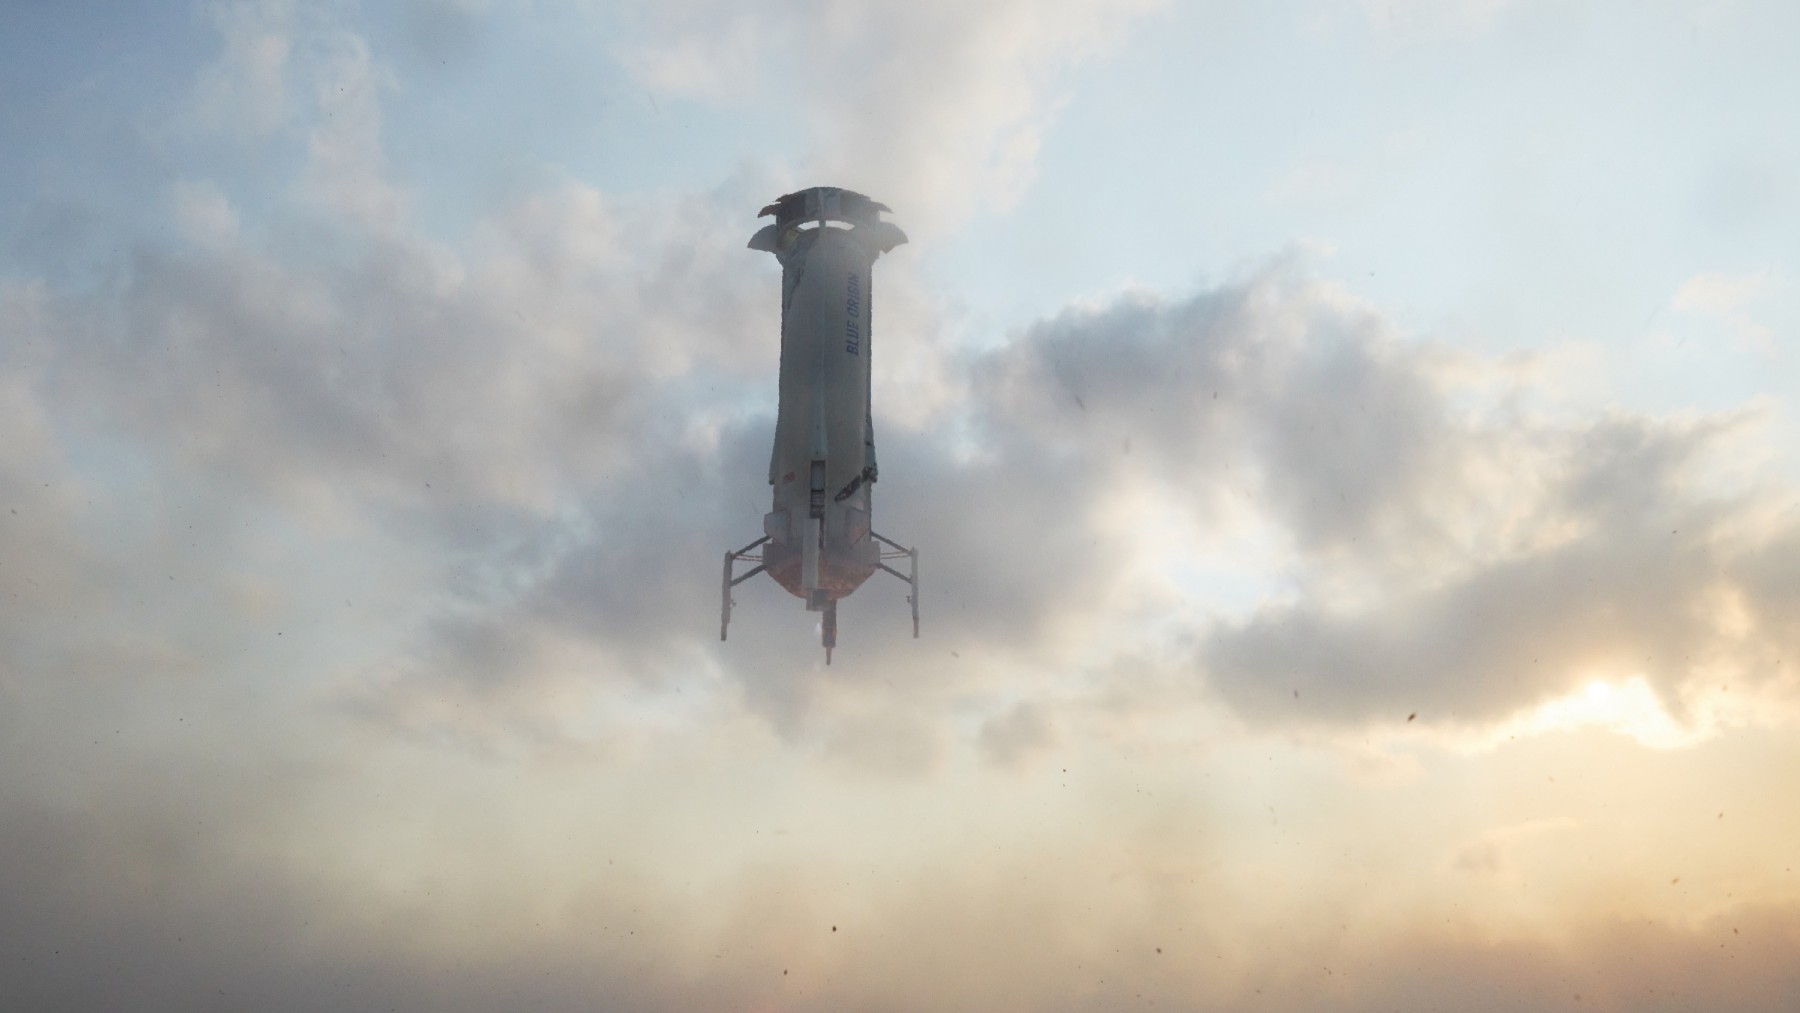 The Blue Origin flight (20 July 2021) into space. Amazon founder Jeff Bezos was accompanied on the Blue Origin journey by his brother, Mark Bezos, as well as the oldest and youngest people ever to go to space, Wally Funk, 82 years old, and Oliver Daemon, 